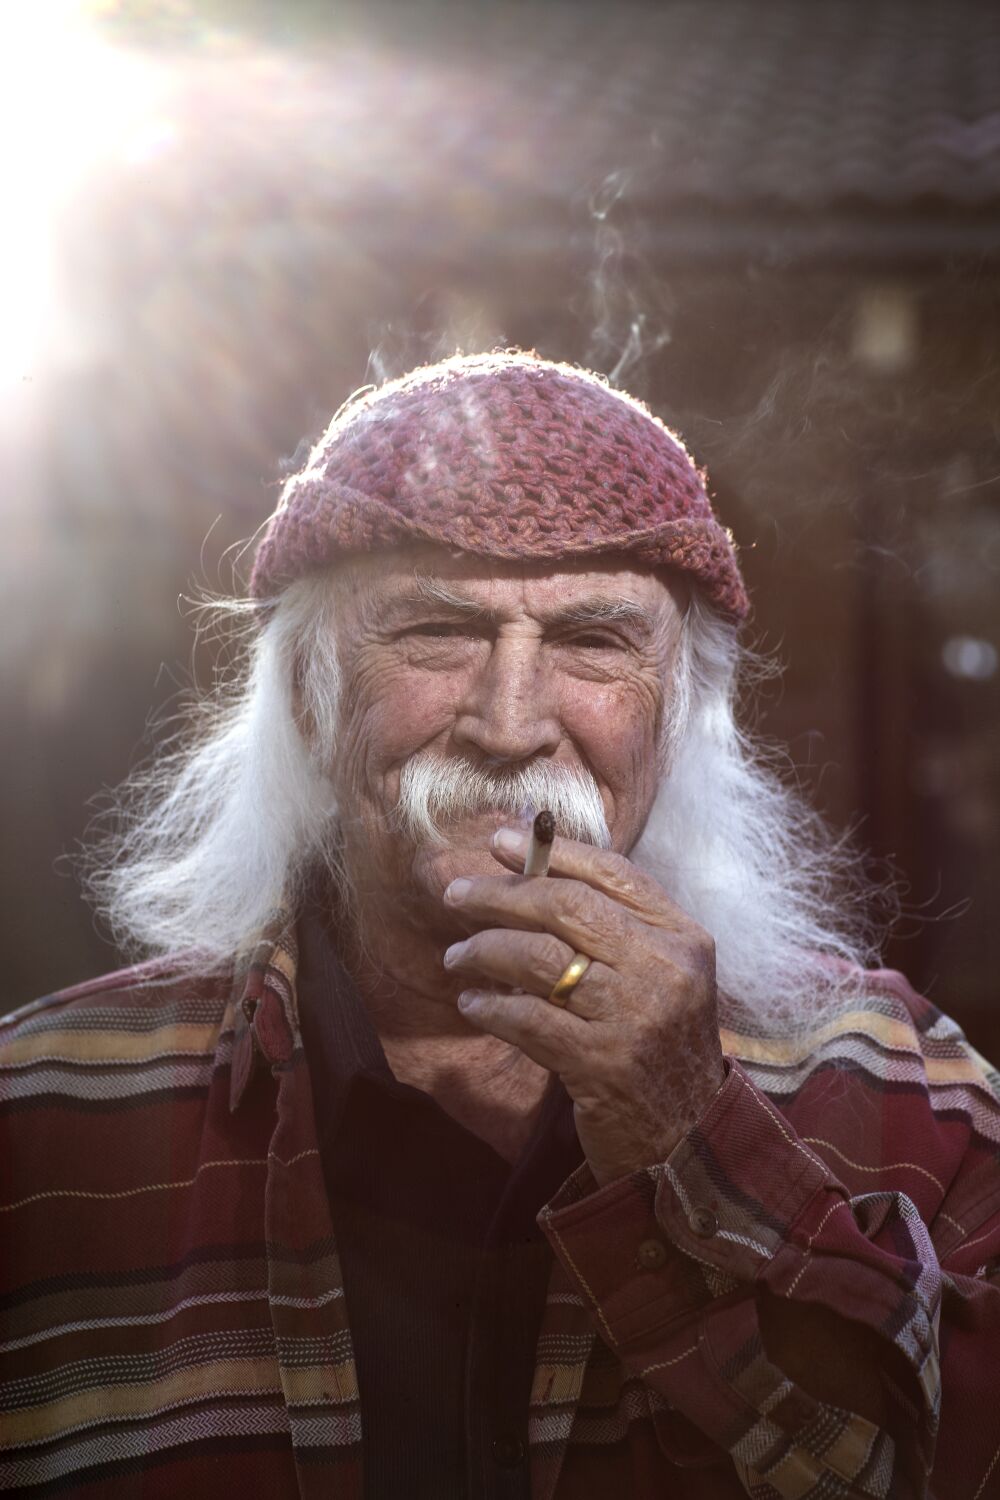 David Crosby loved to battle: with bandmates, with strangers. His music backed up all the talk